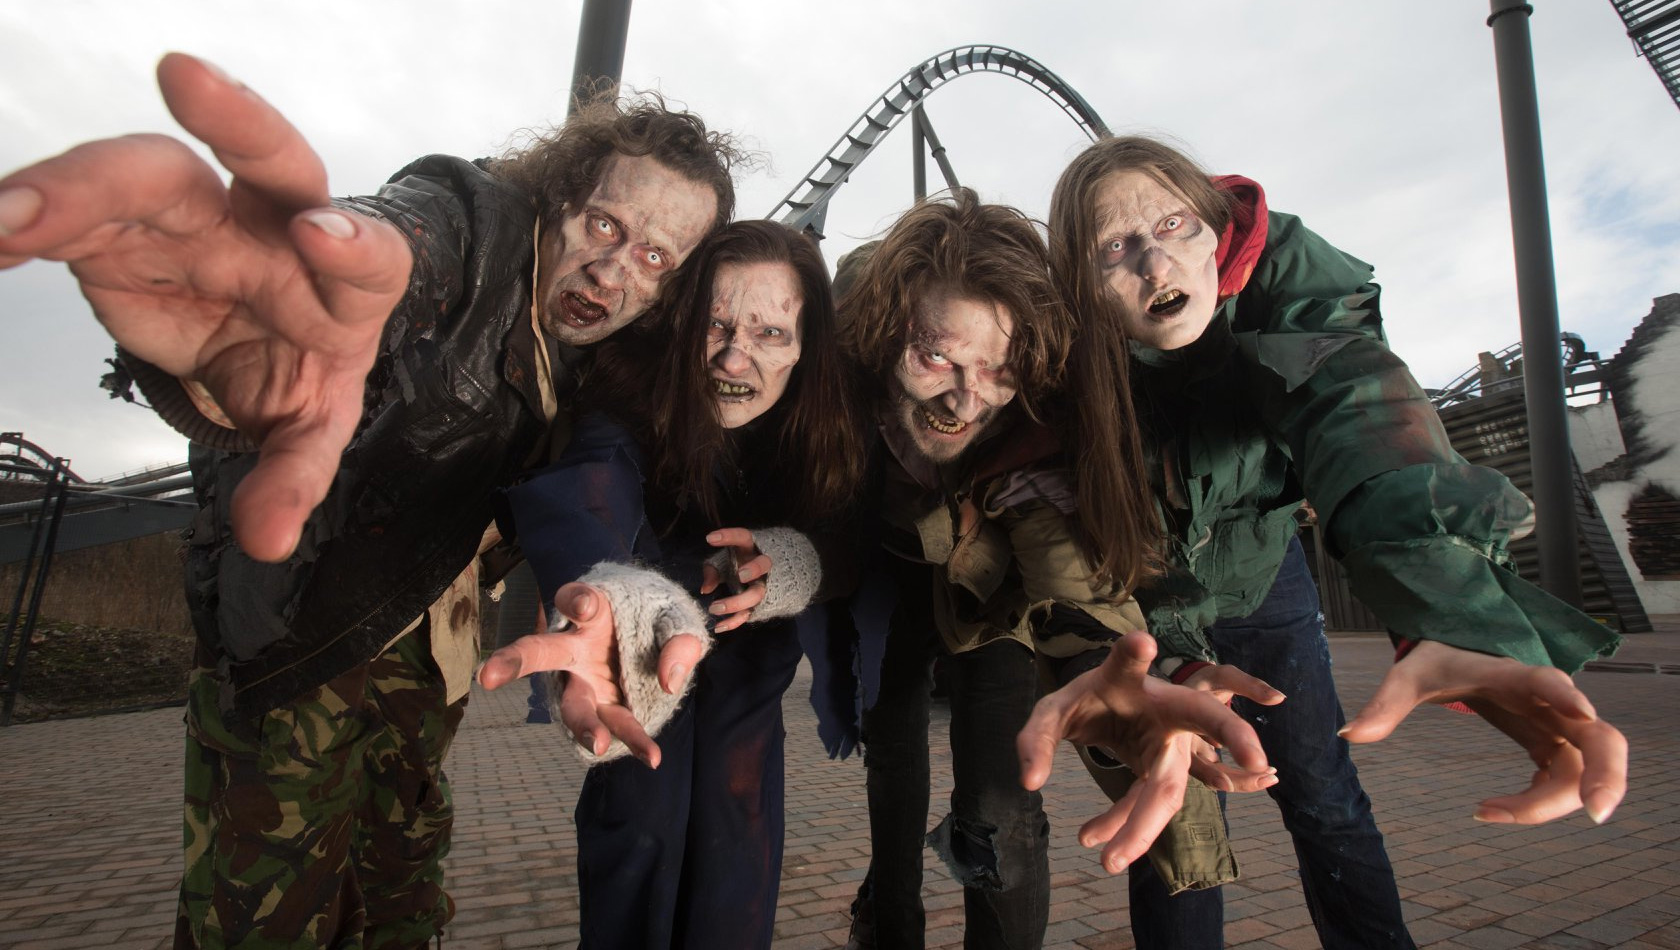 Thorpe Park 2018: The Year of Walking Dead